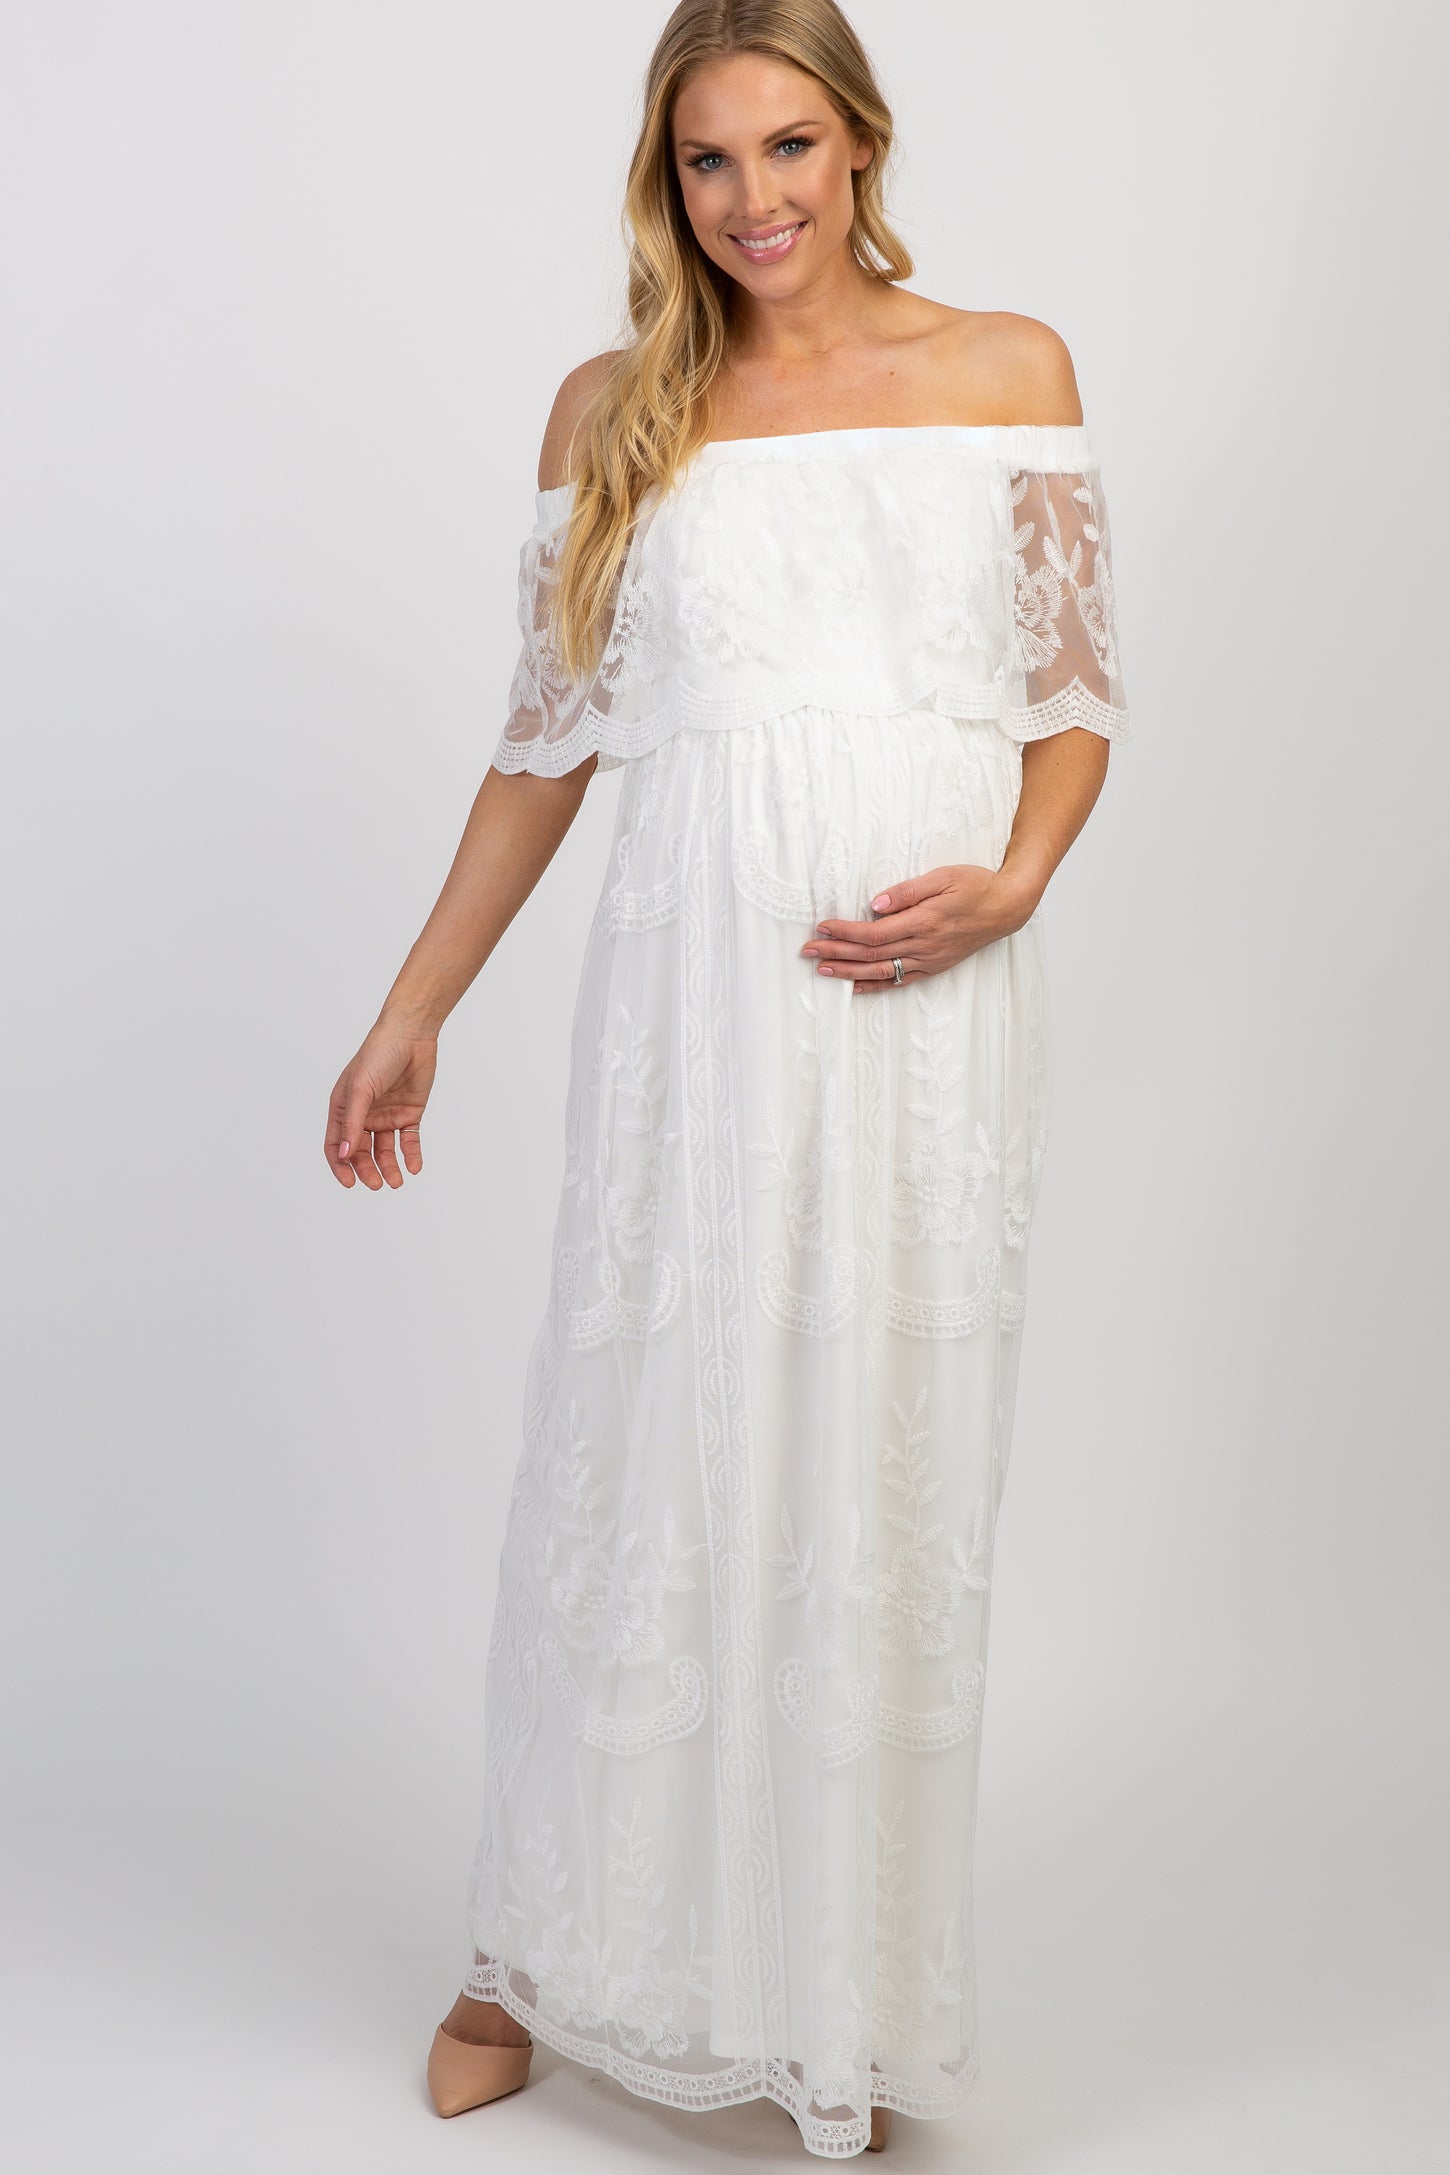 Nightgown PLUS SIZE White Pure Cotton and Crochet Lace. Romantic Sleepwear,  Lingerie, Lounge-wear, Made to Order, Aust. Sizing Xs XXXL -  Ireland